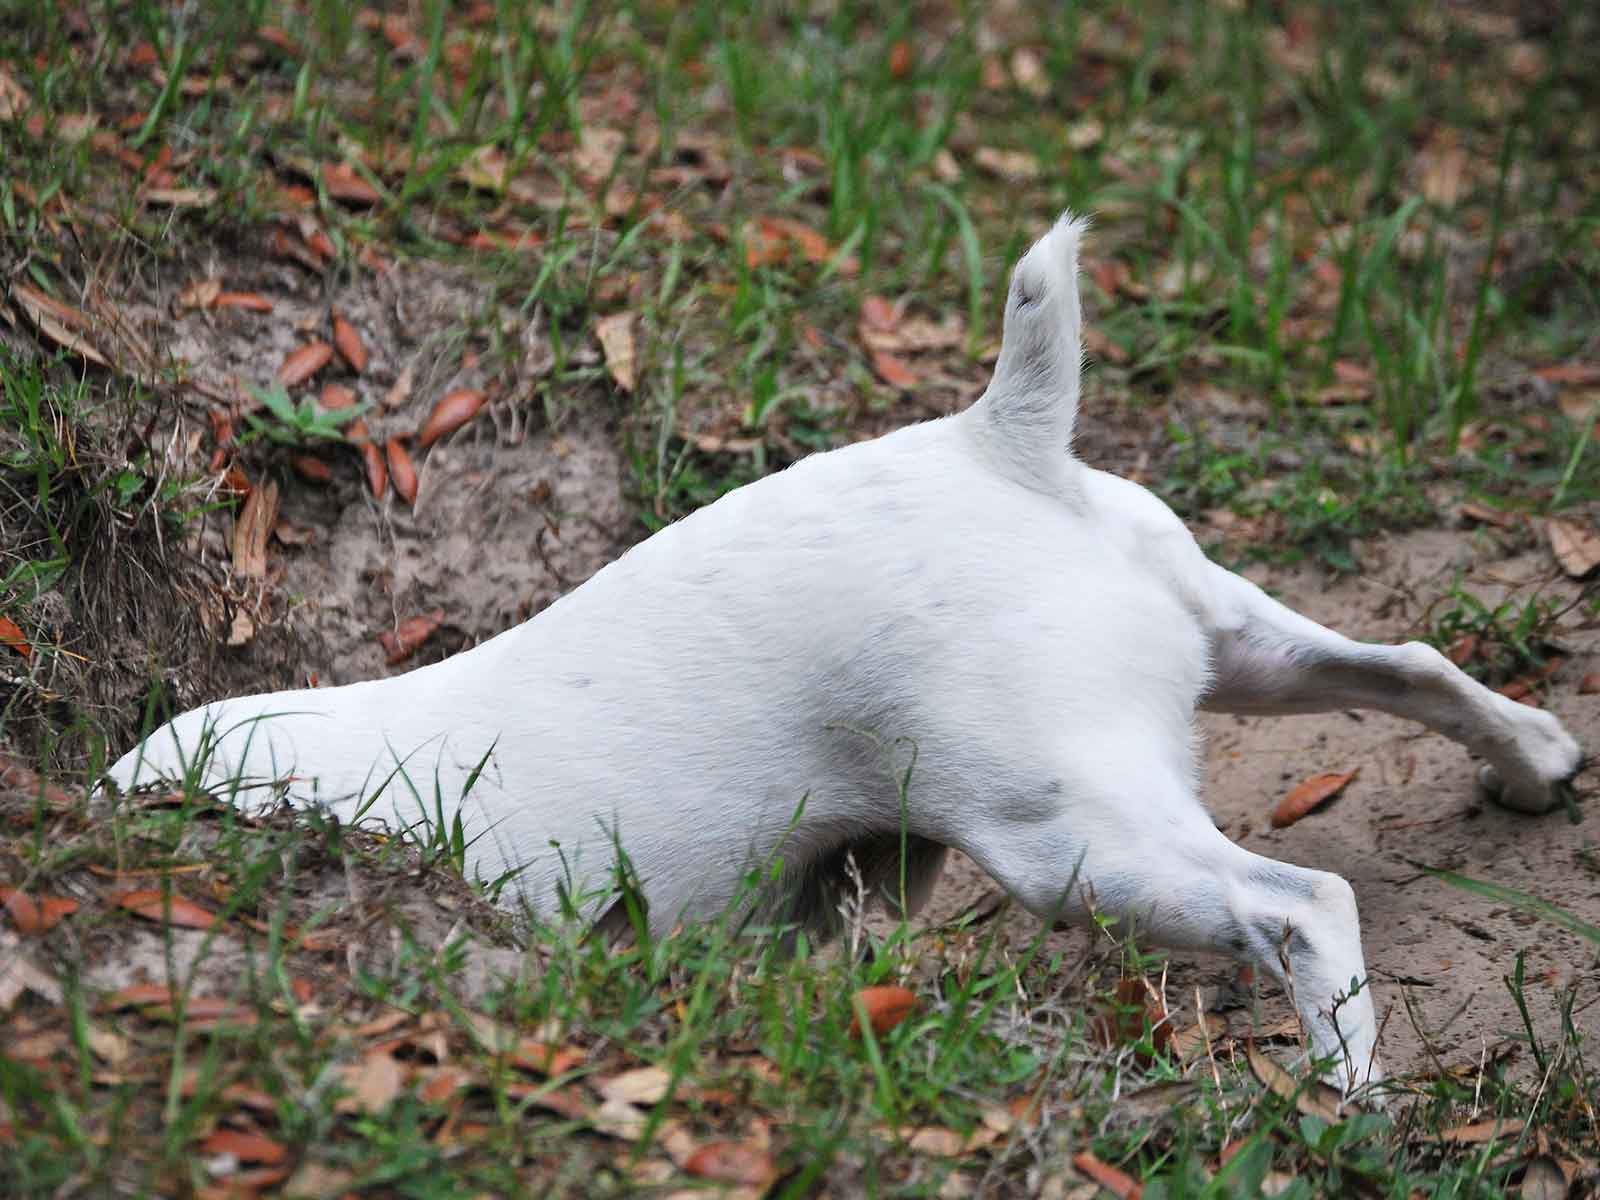 Small White Dog Digging A Hole With Its Butt In The Air